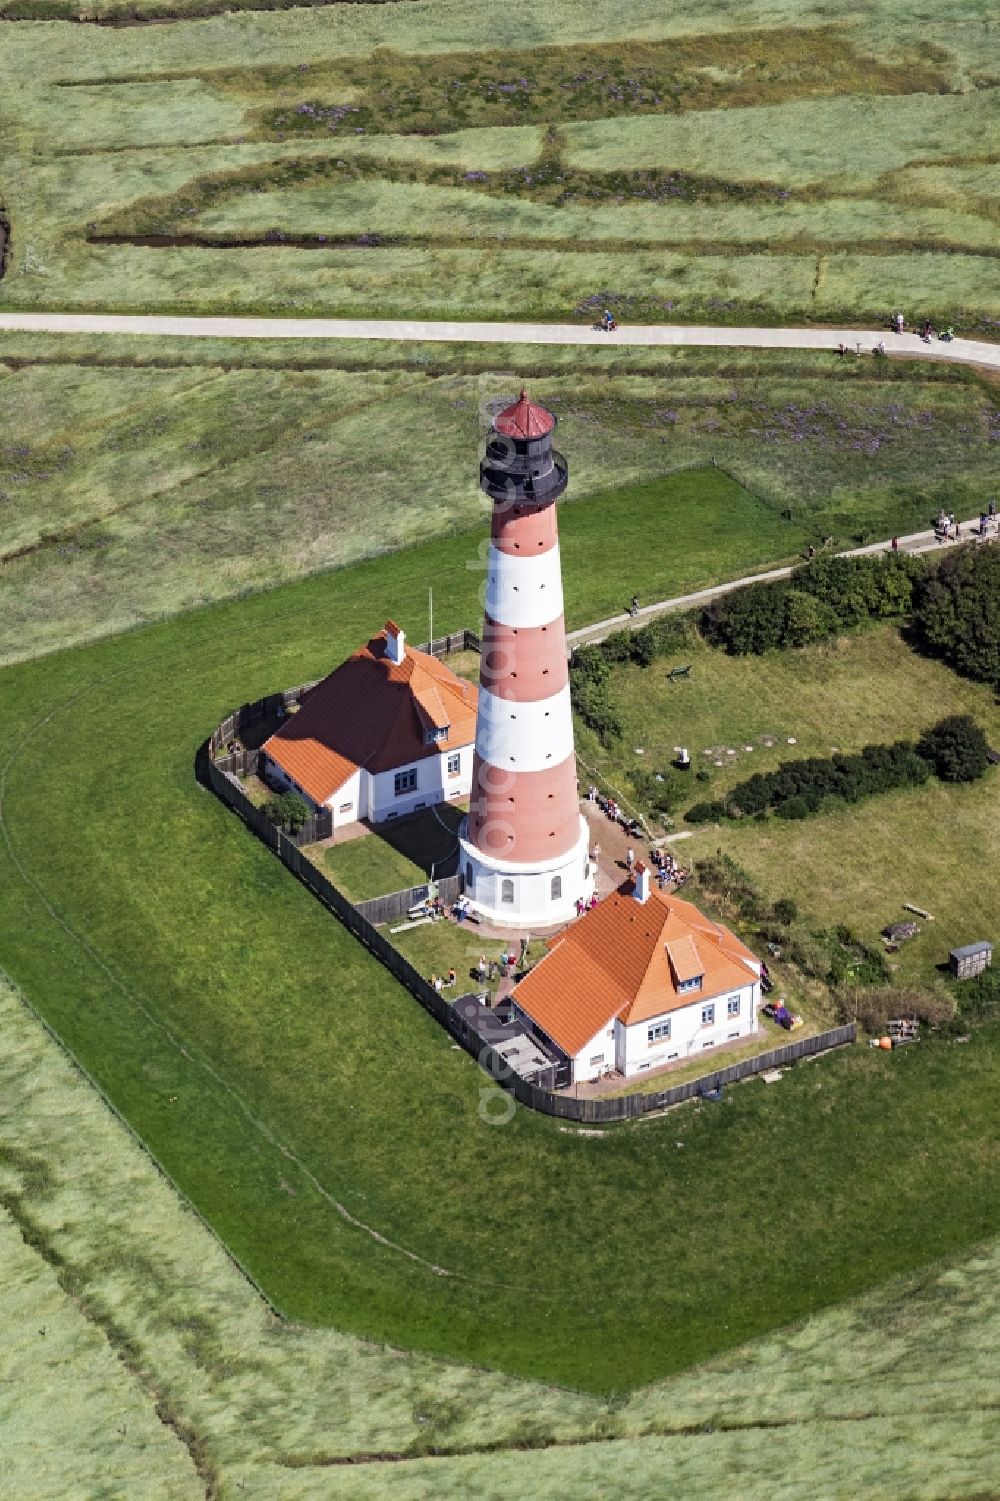 Westerhever from the bird's eye view: Lighthouse as a historic seafaring character in the coastal area of North Sea in the district Hauert in Westerhever in the state Schleswig-Holstein